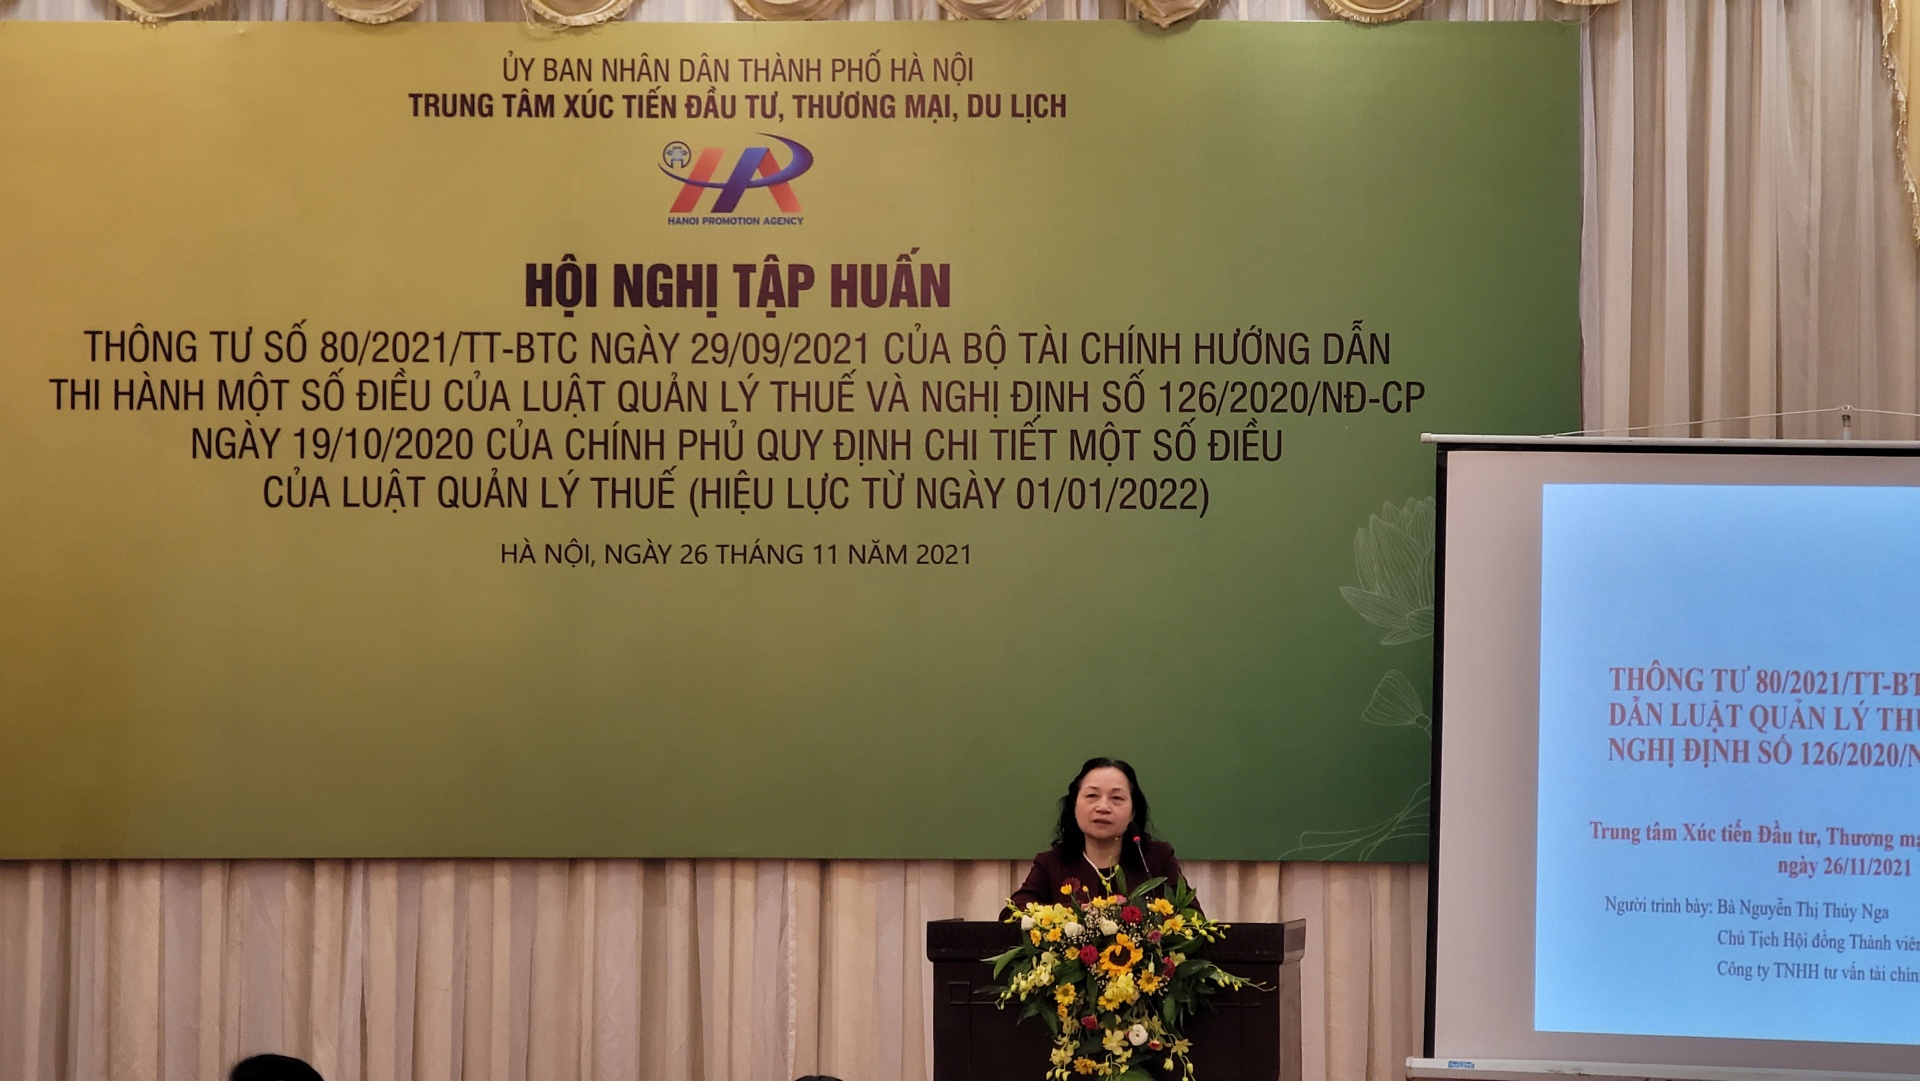 HPA holds tax training conference on Circular No.80/2021/TT-BTC